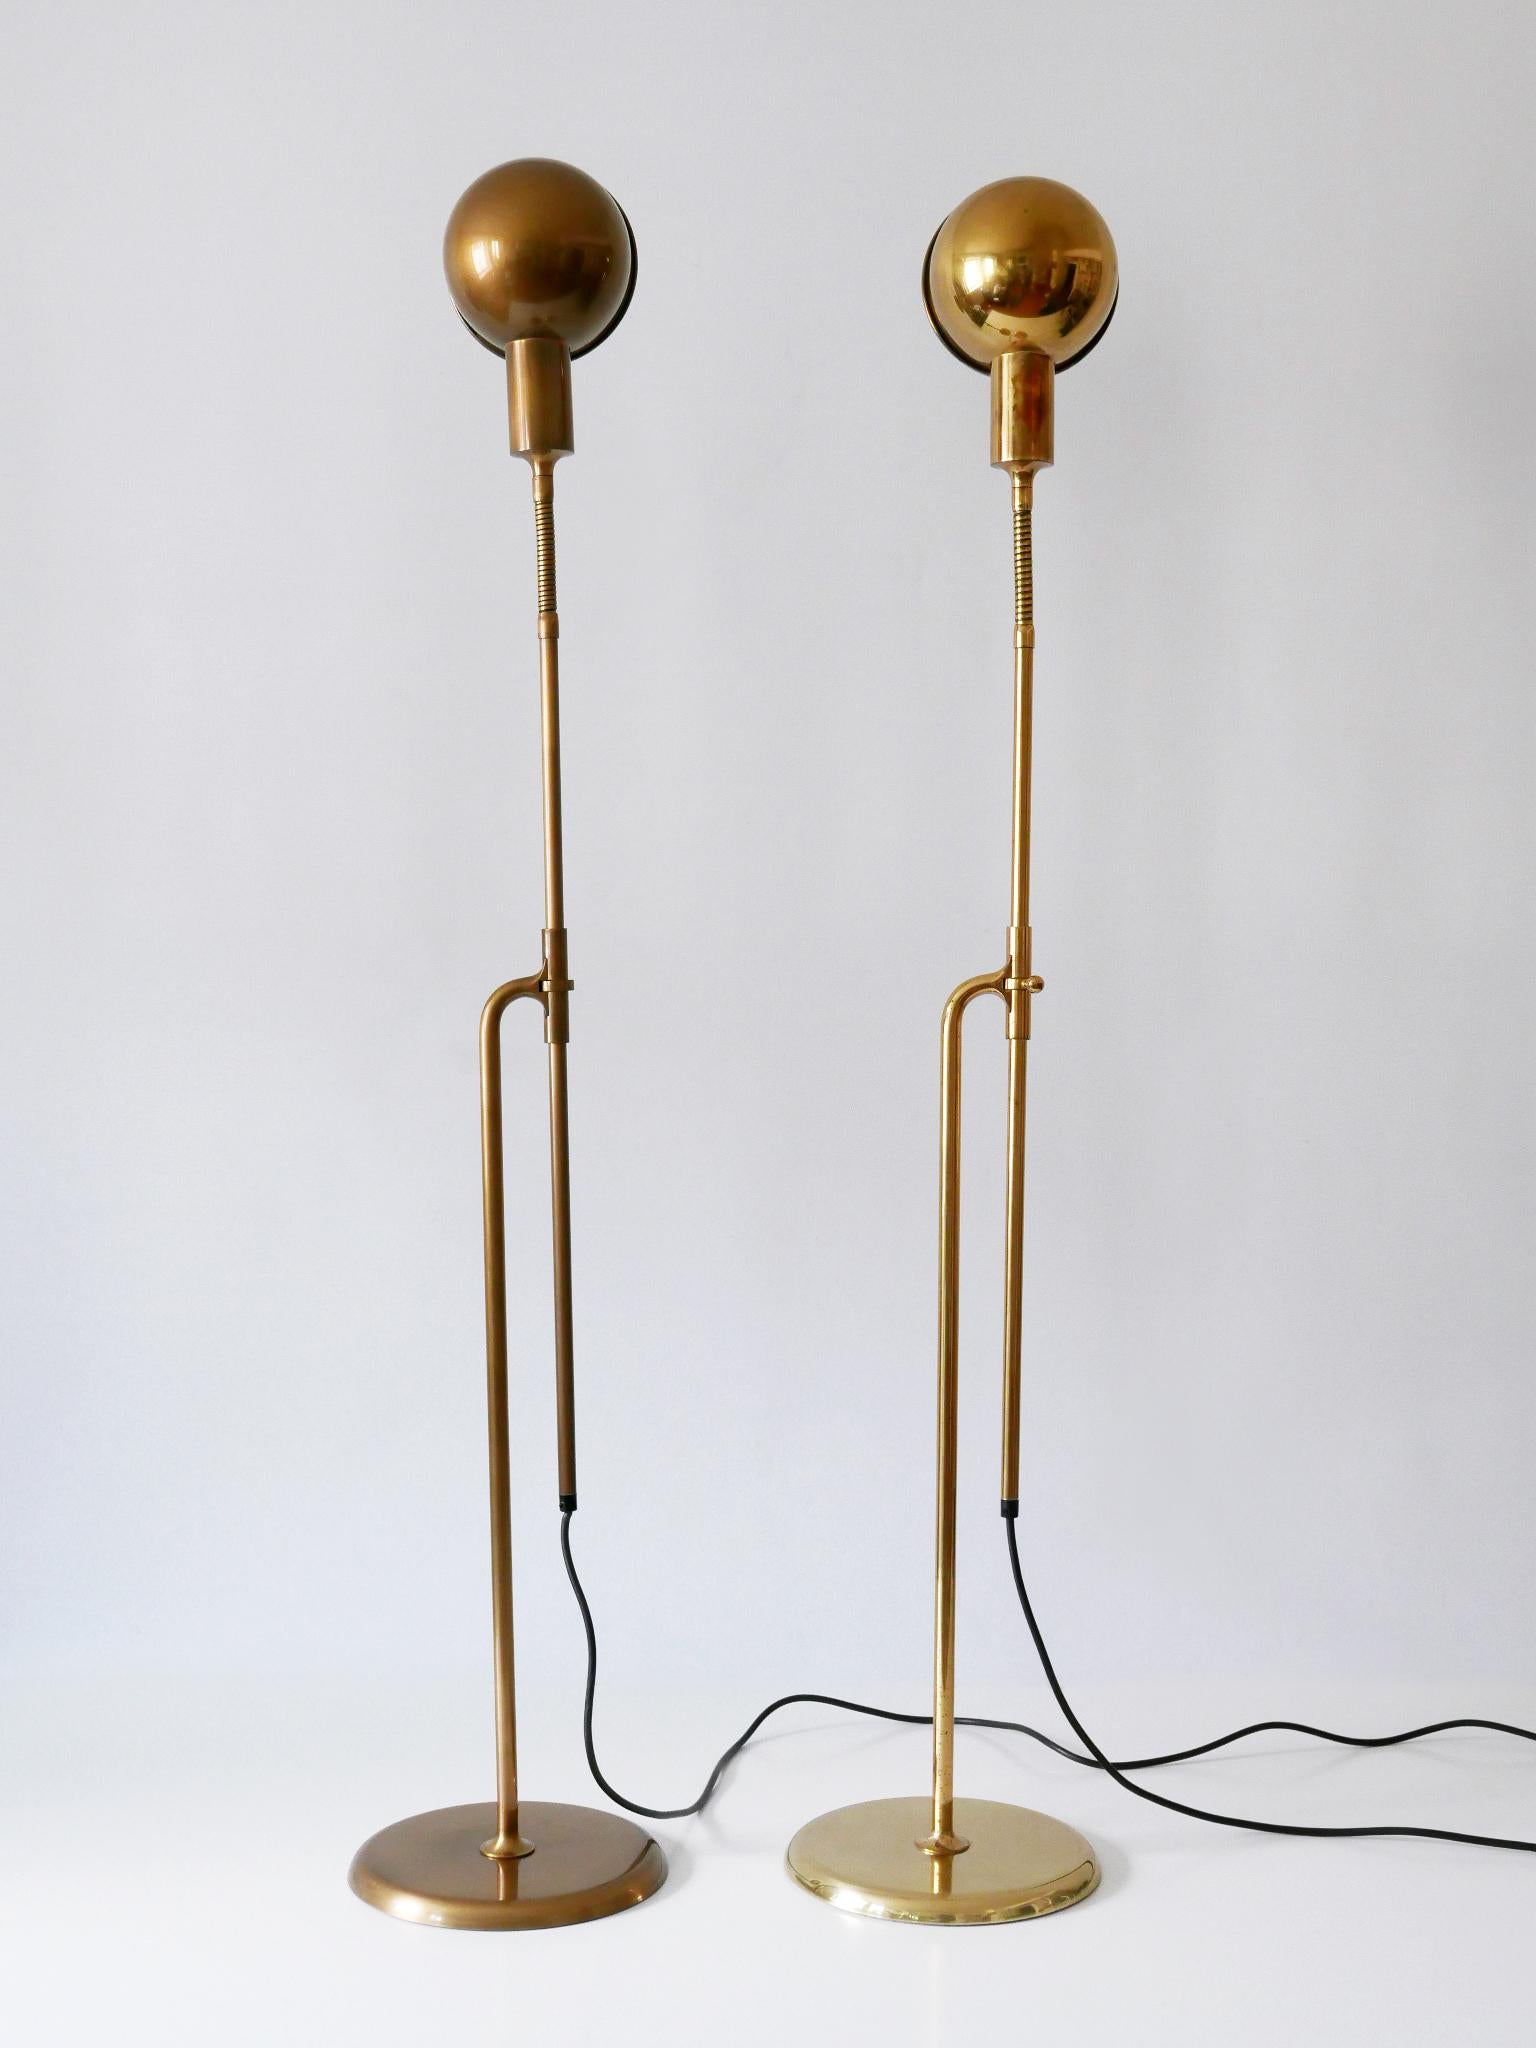 Set of Two Mid-Century Modern Reading Floor Lamps 'Bola' by Florian Schulz 1970s For Sale 7